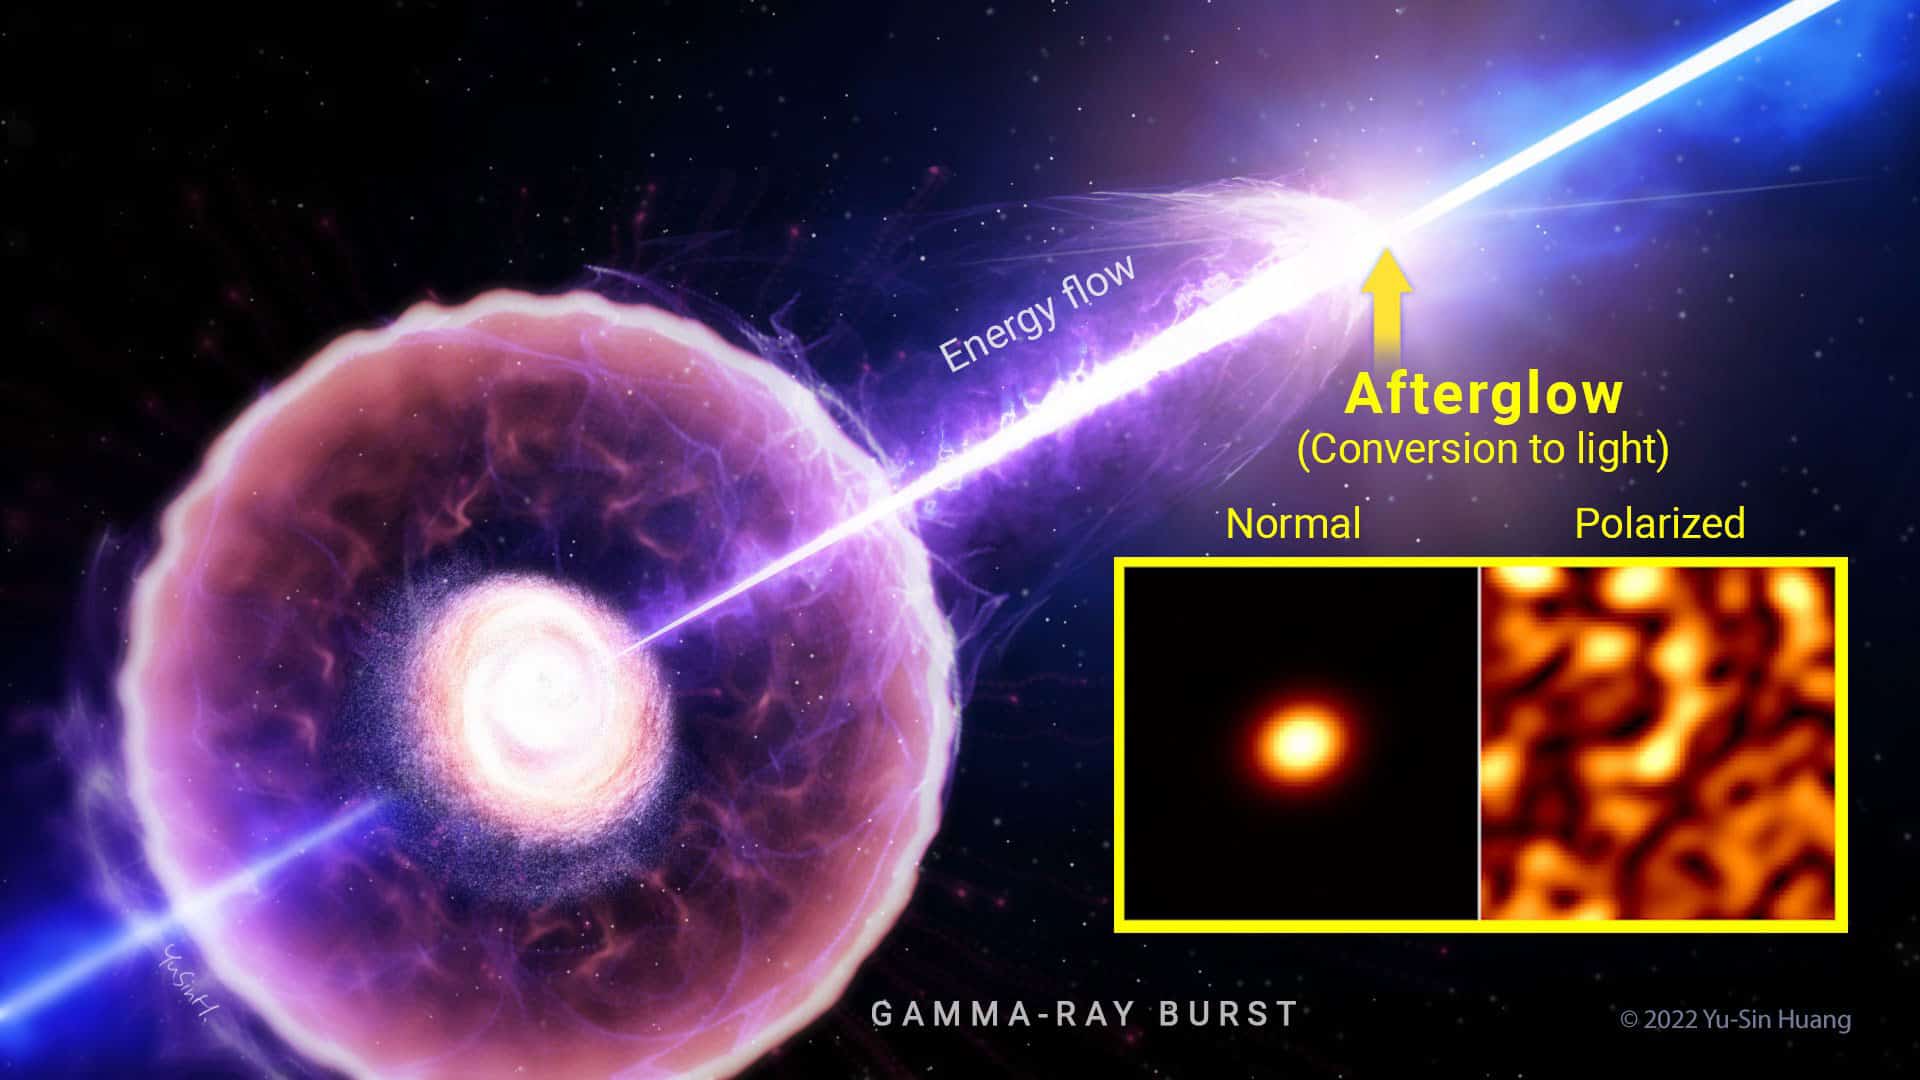 Measuring Gamma-Ray Bursts' hidden energy reveals to the universe